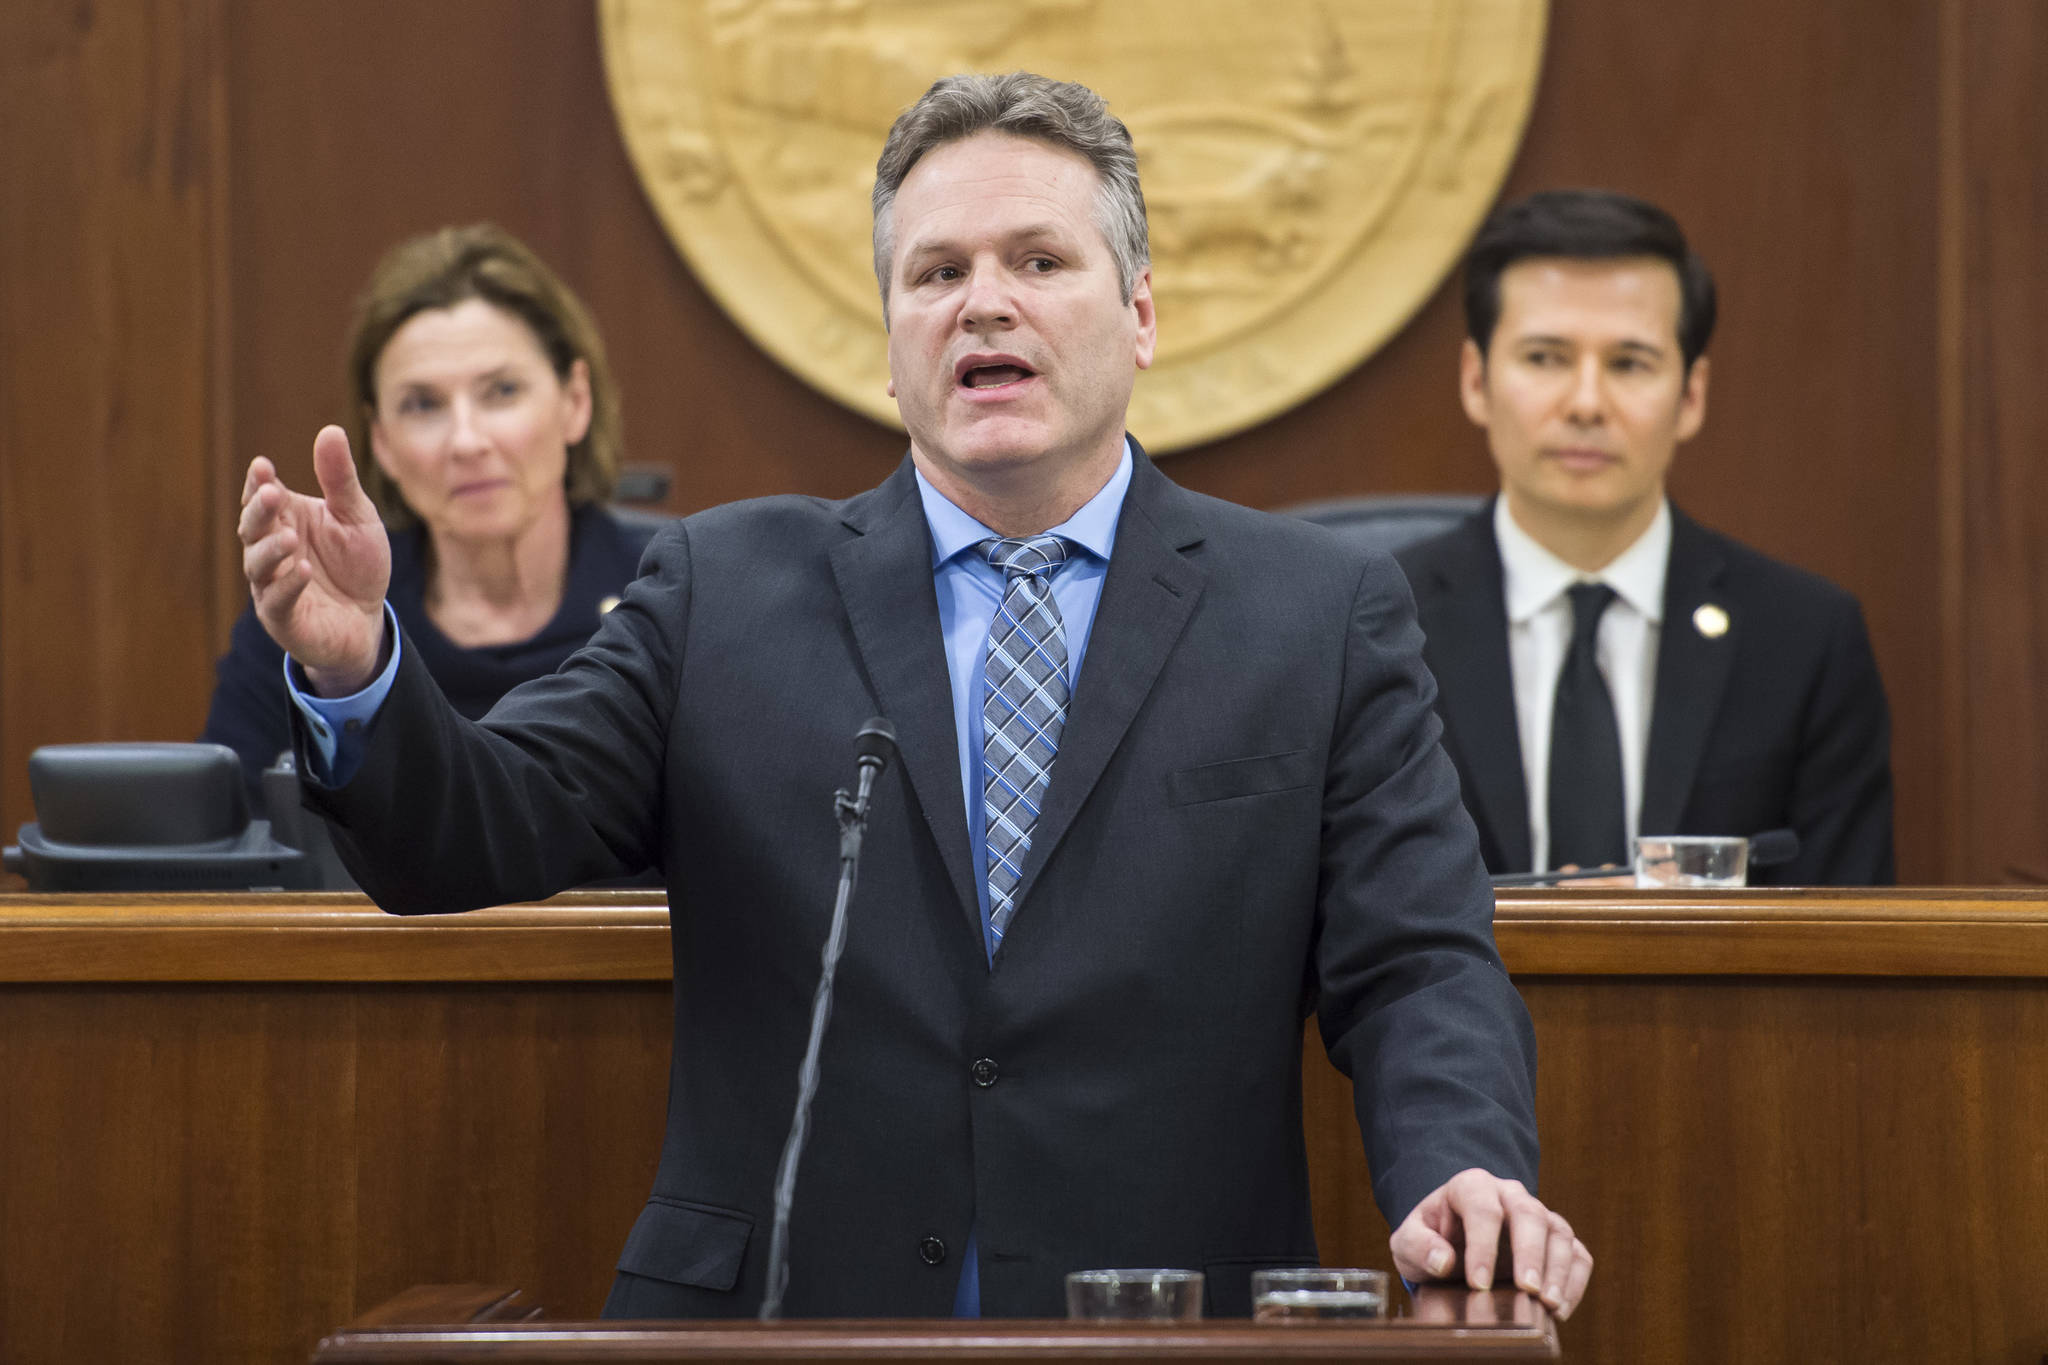 Opinion: Gov. Dunleavy is ‘out of step’ with Alaska families, businesses